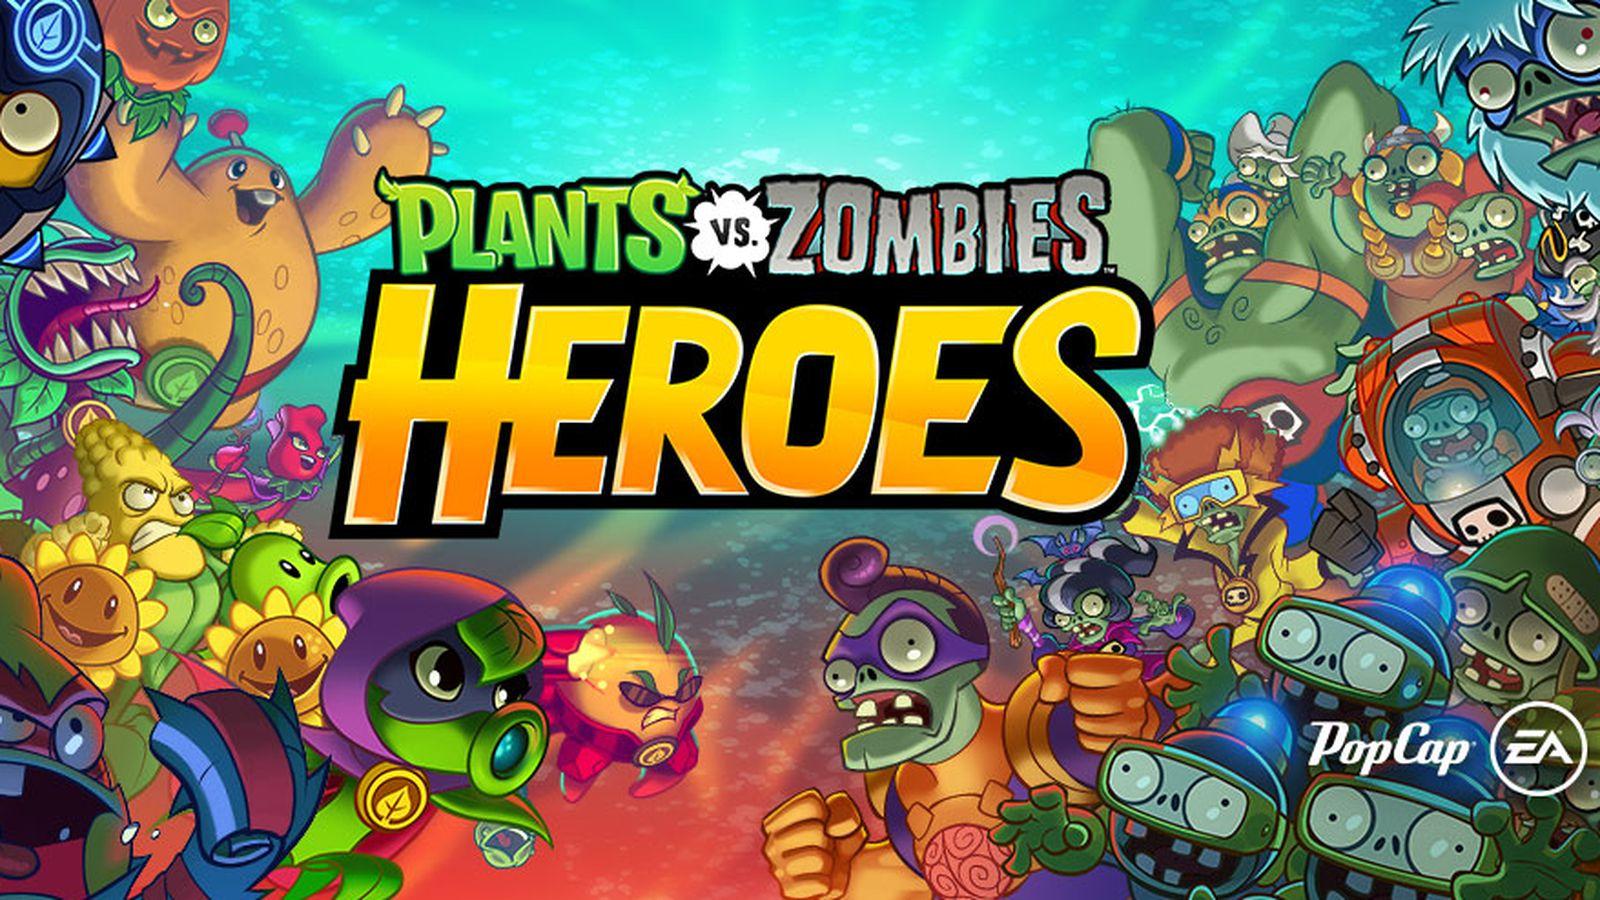 The next Plants vs. Zombies game is all about collectible cards